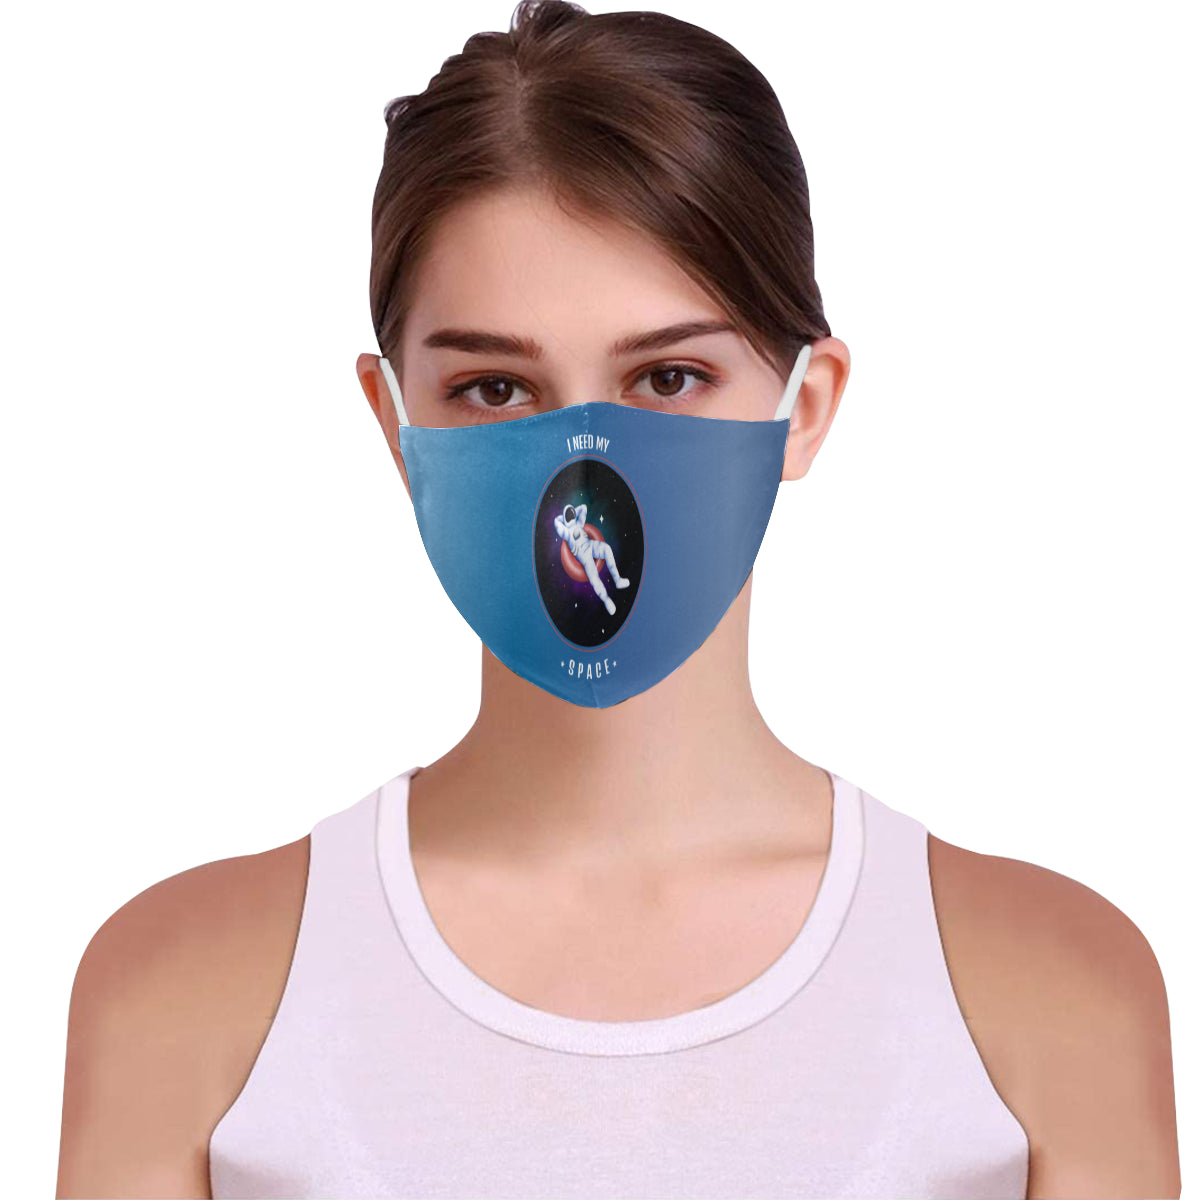 I Need My Space Cotton Fabric Face Mask with Filter Slot & Adjustable Strap (Pack of 5) - Non-medical use